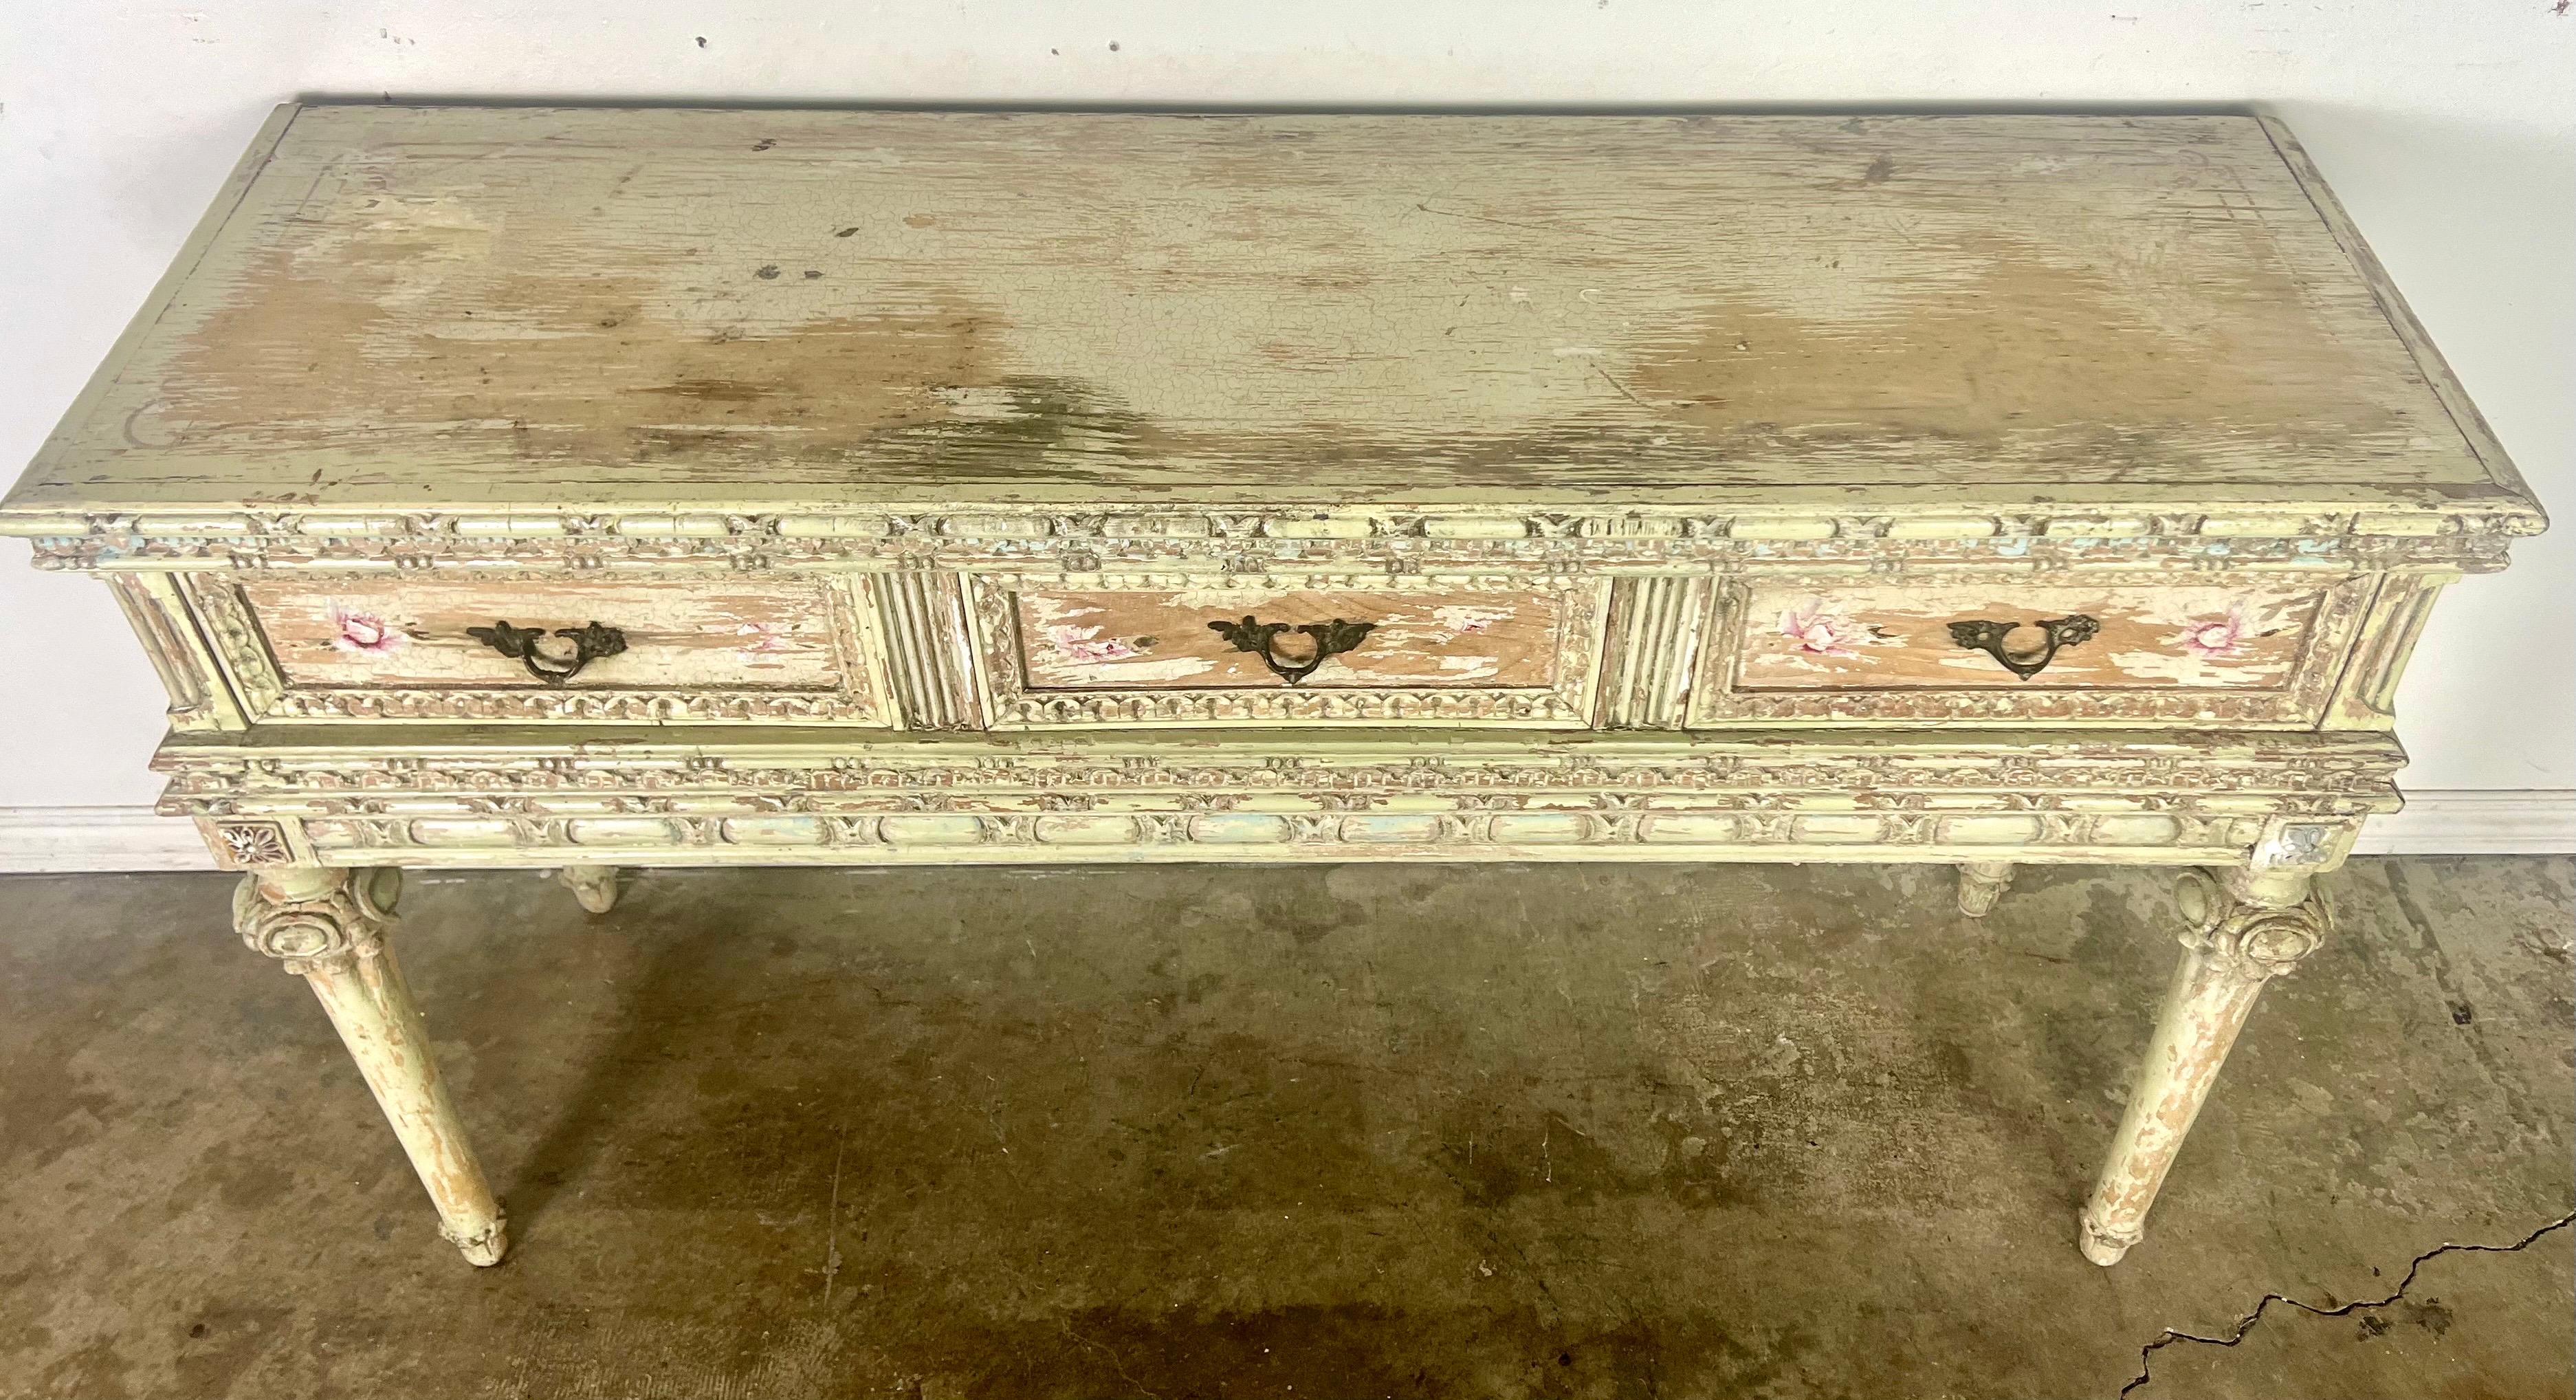 Louis XVI style French painted console table with decorative flourishes.  It features a distressed finish, classical motifs, and fluted legs inspired by neoclassical design elements.  The ornate carving and painted details add to its charm. Remnants